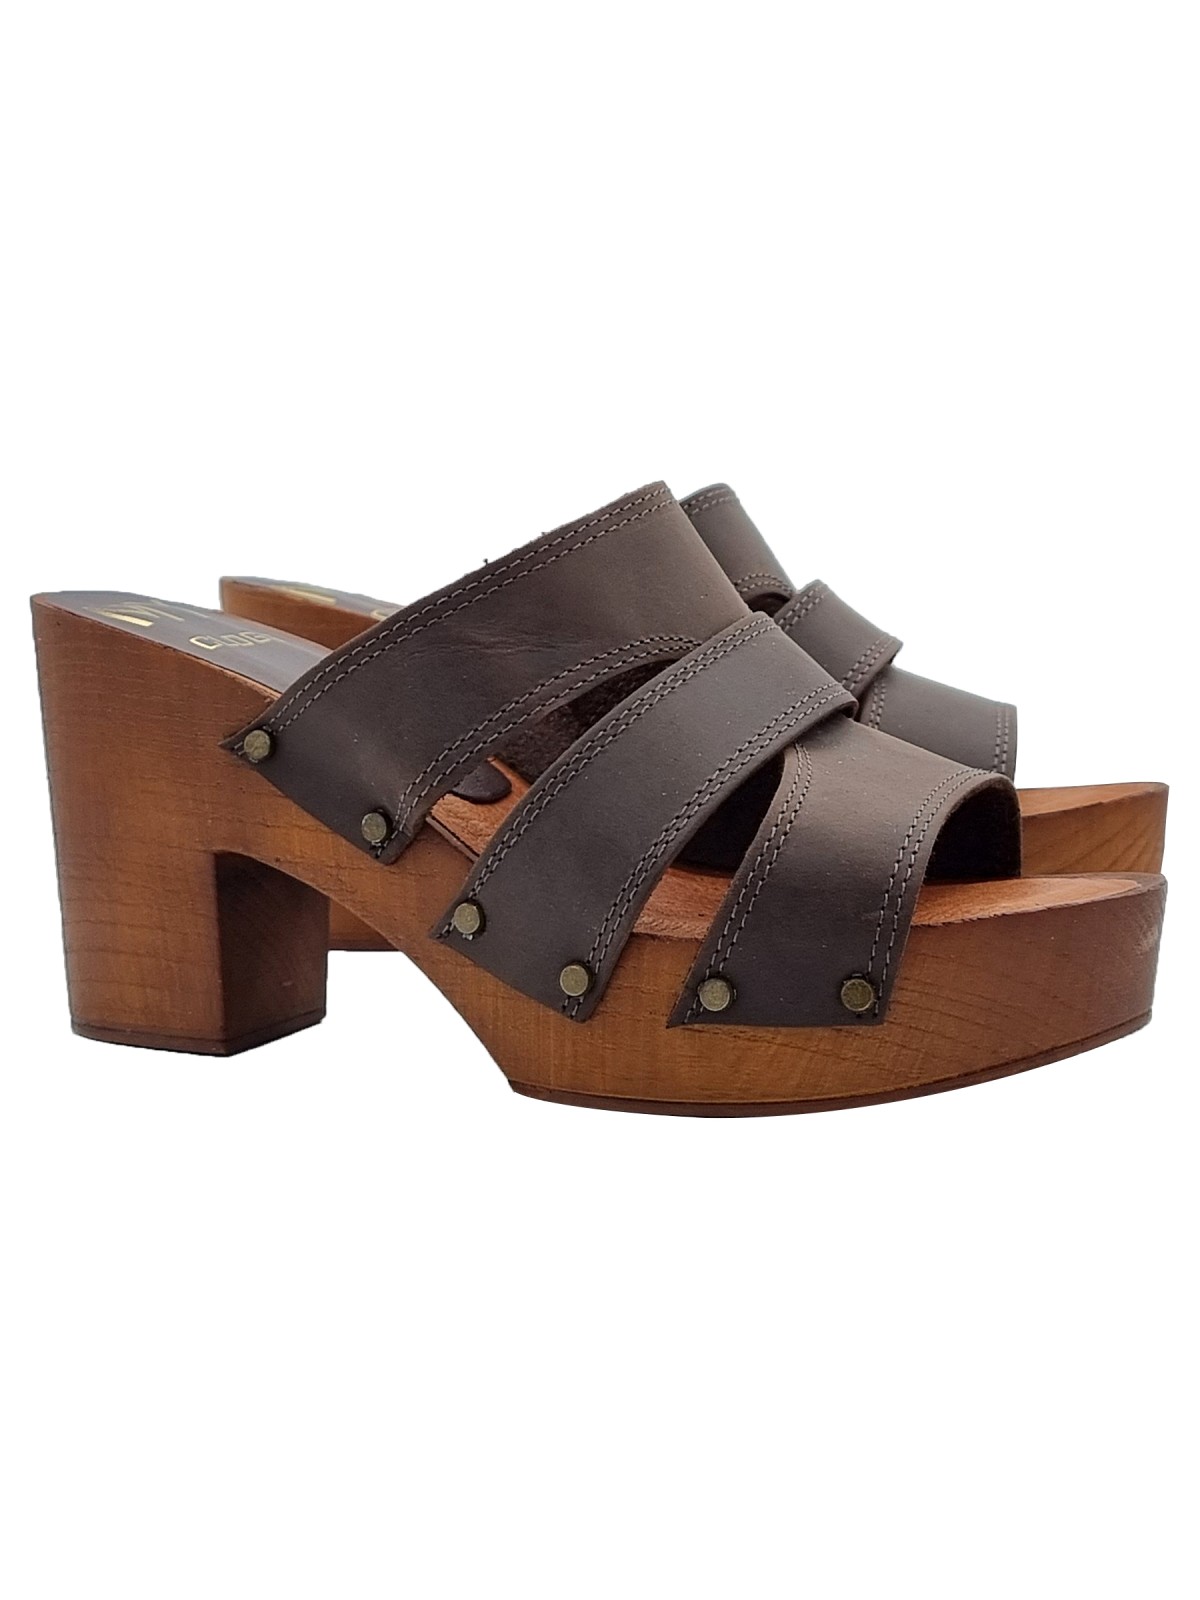 CLOGS WITH DARK BROWN LEATHER BANDS AND HEEL 9,5